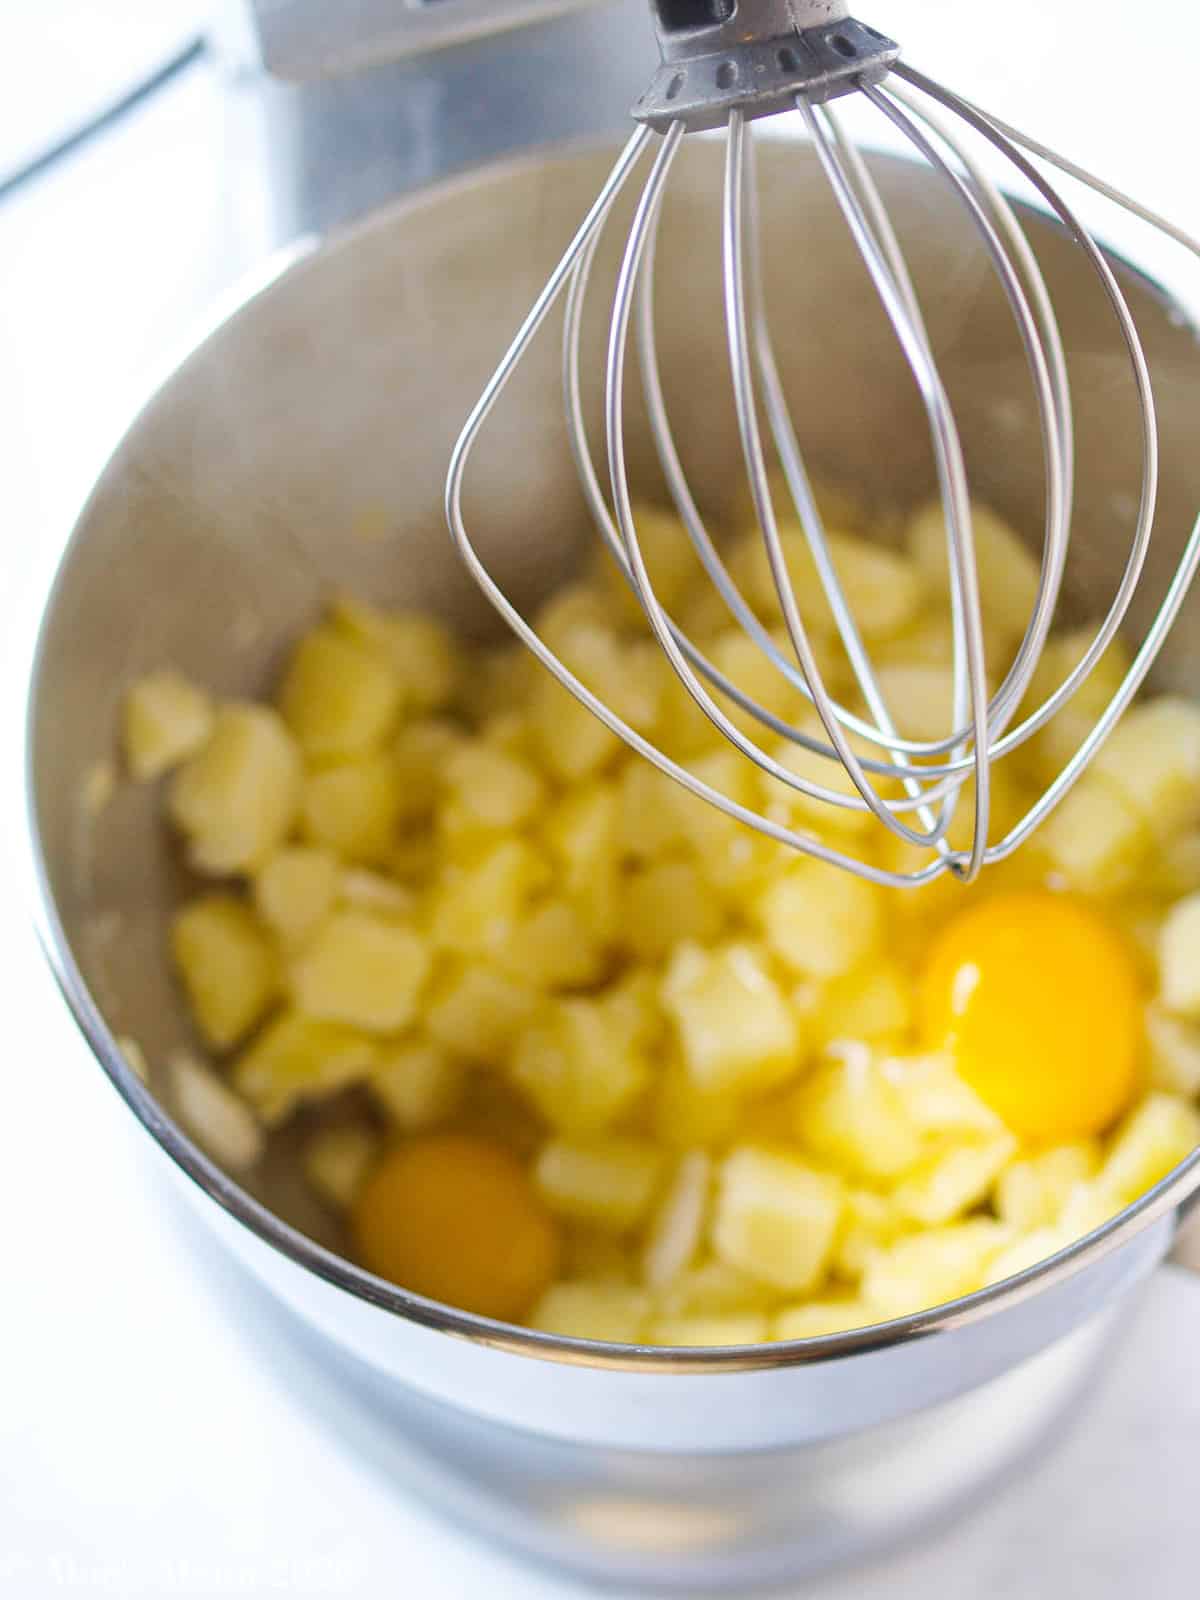 Potatoes, eggs, and salt in a large mixing bowl